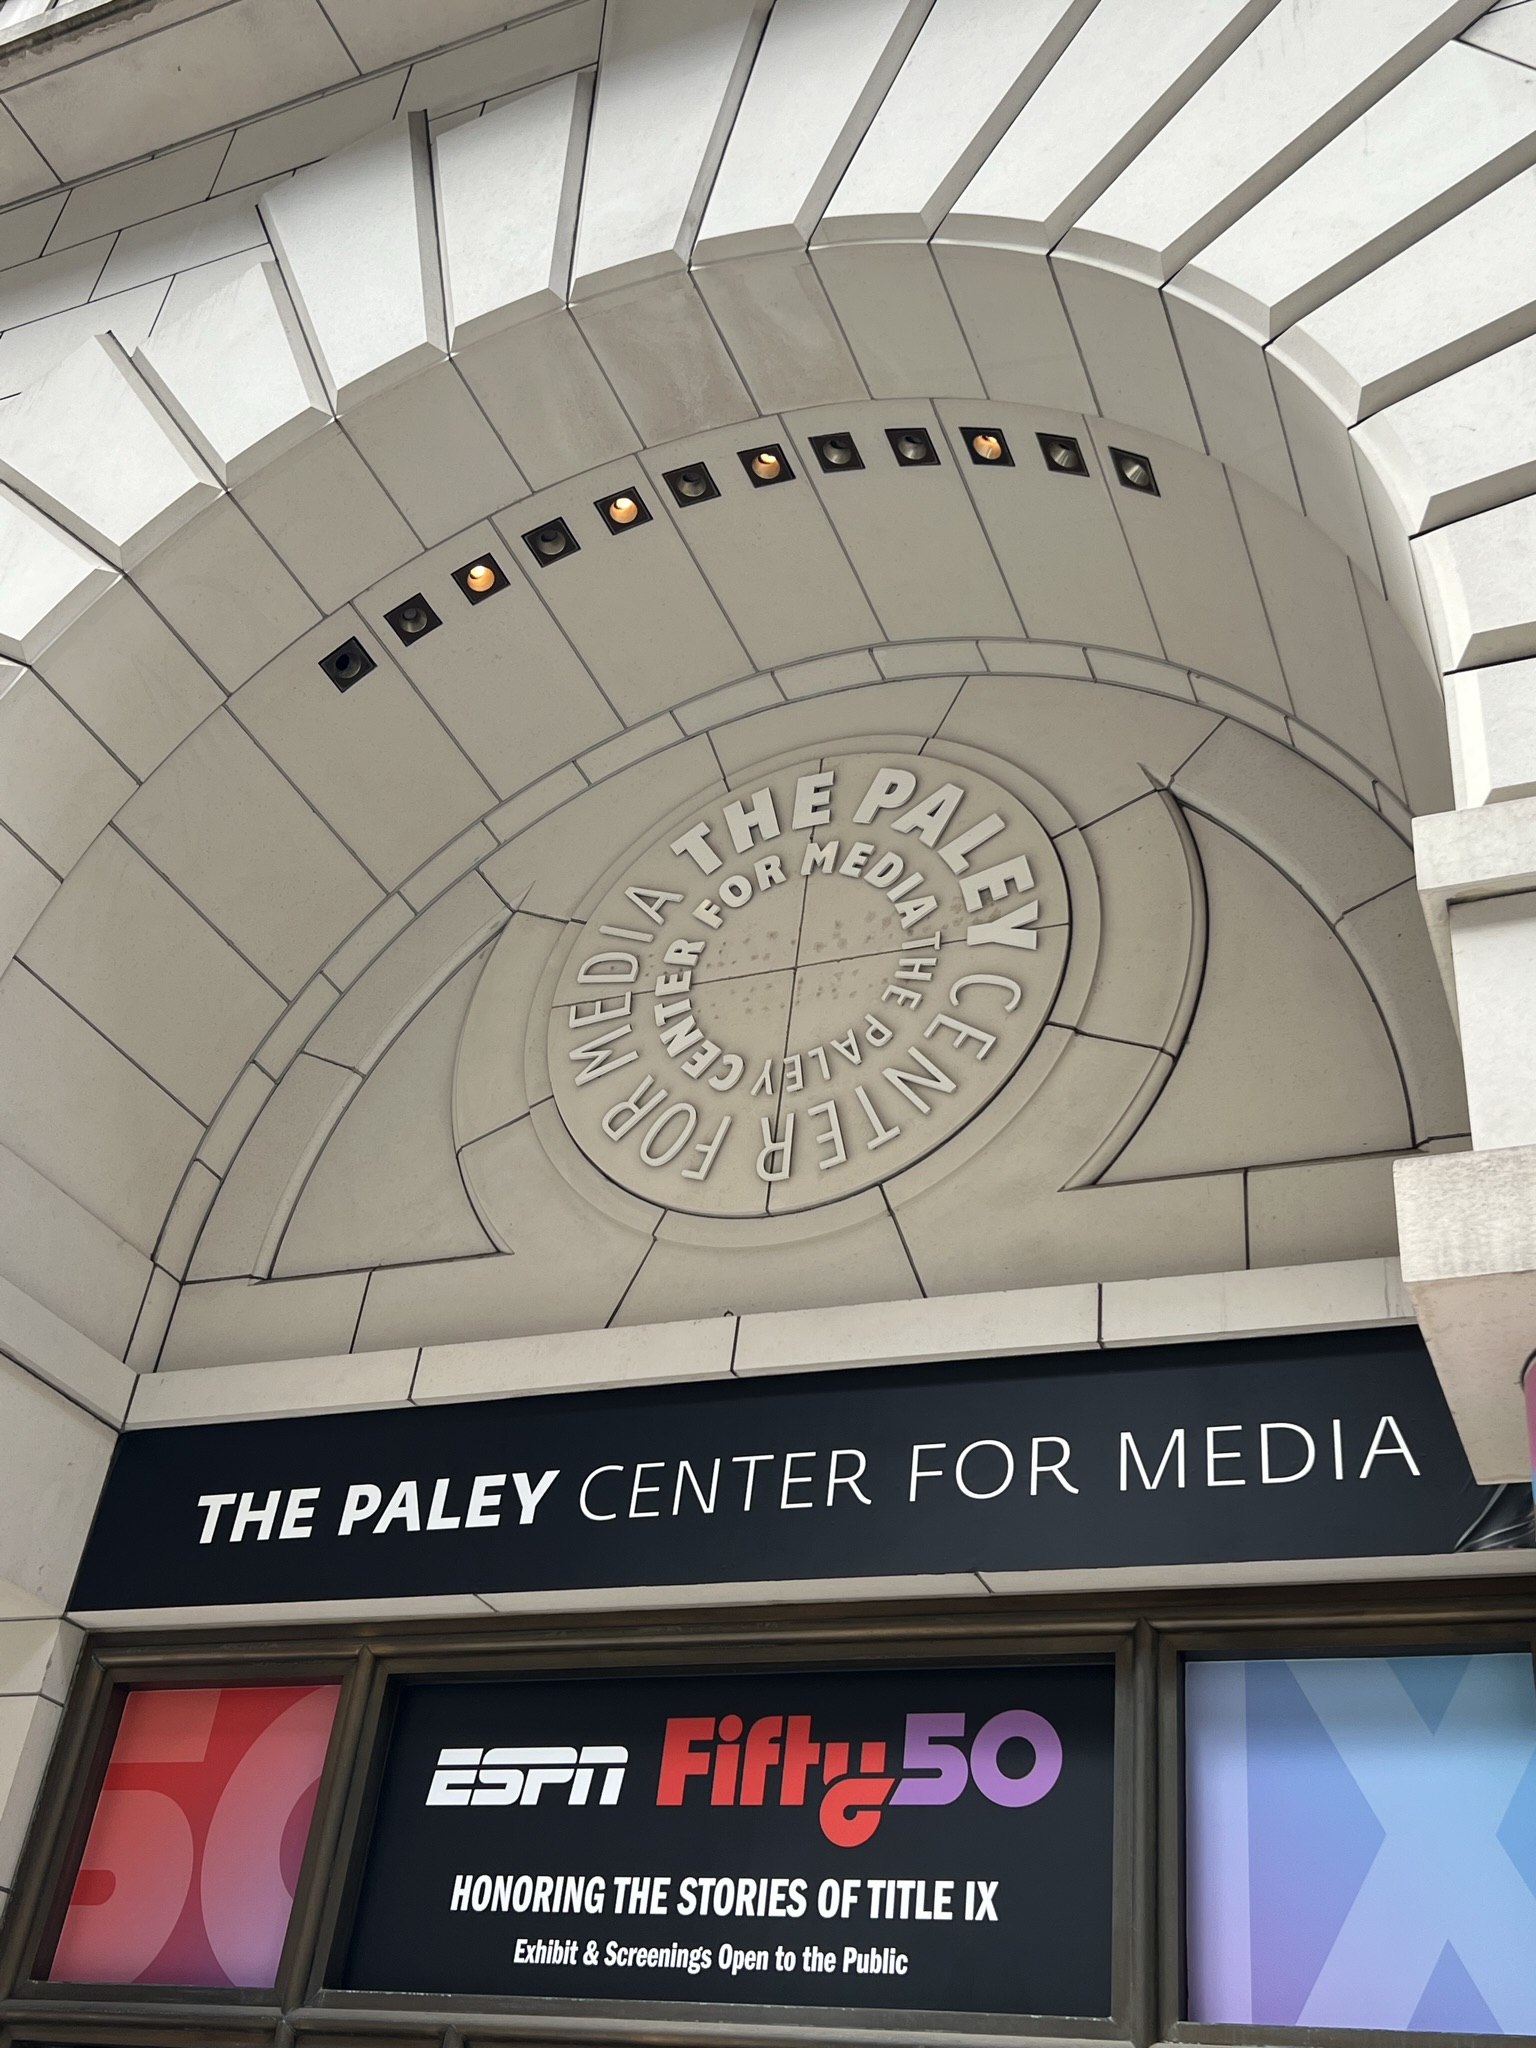 The Paley Center for Media